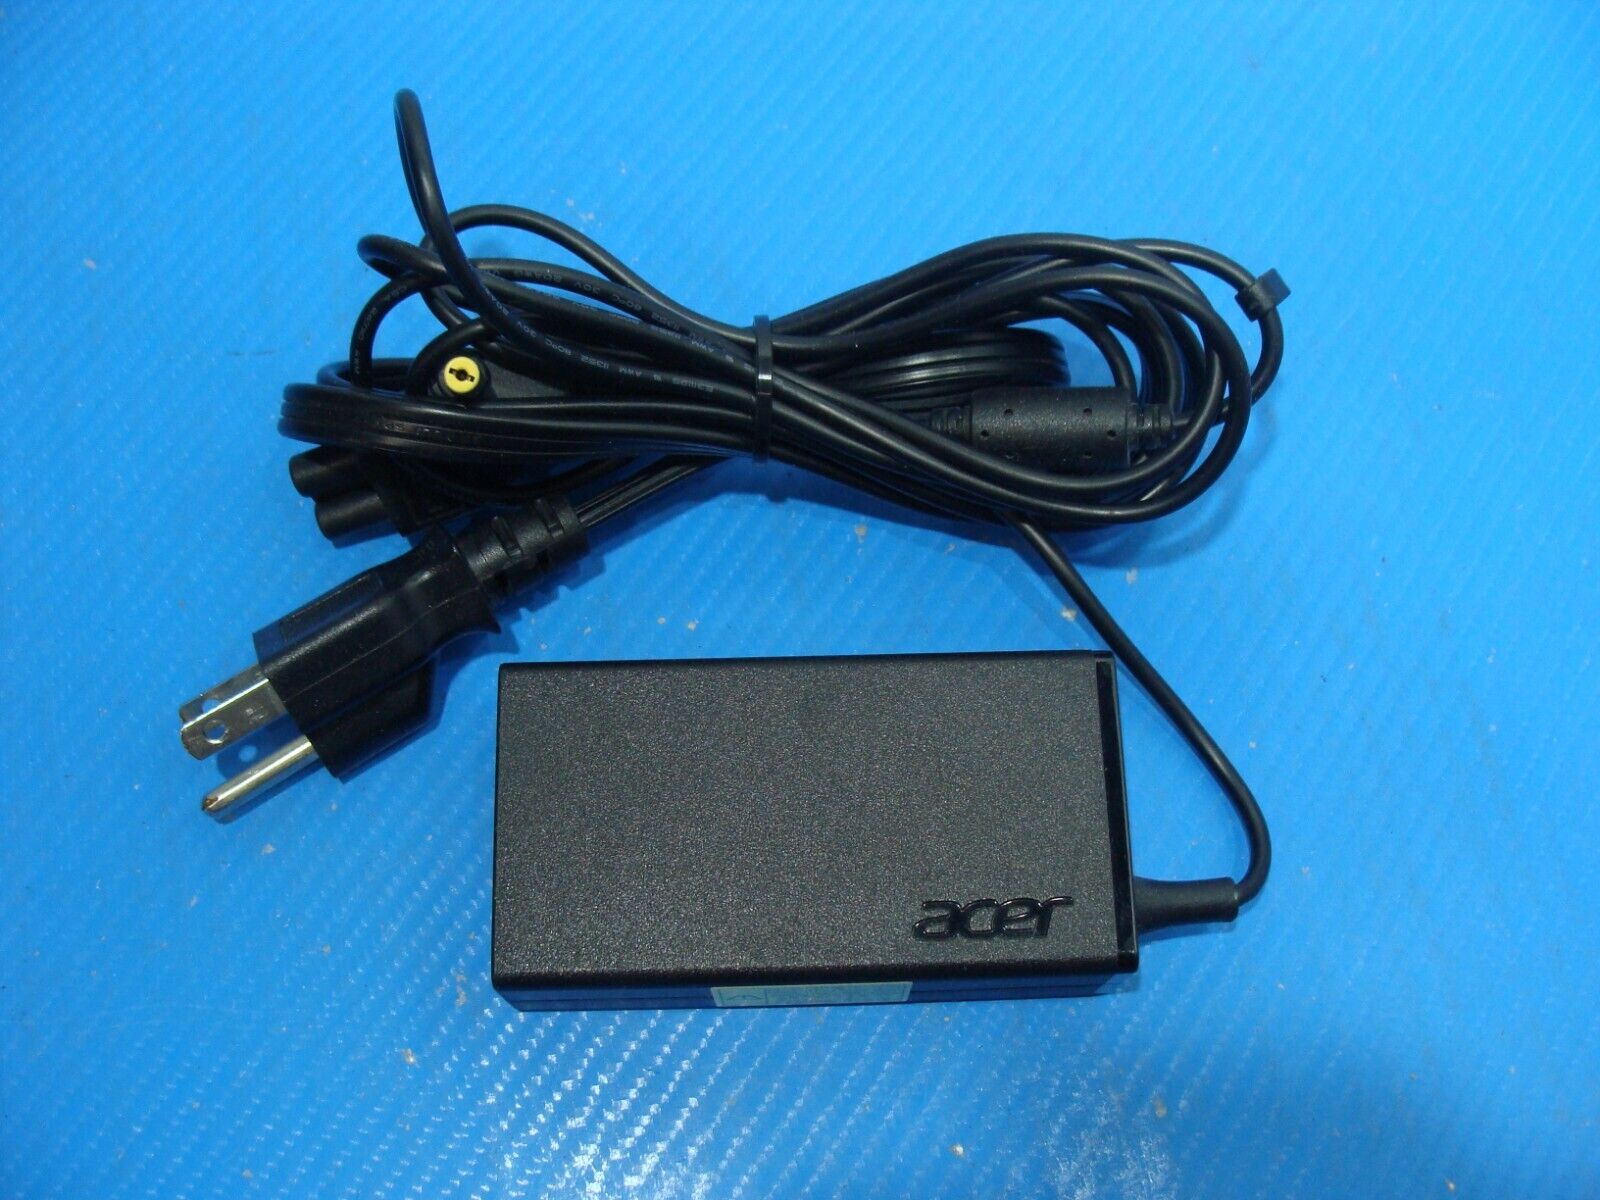 ACER 65W Laptop Charger AC Adapter Power Supply PA-1650-86 19V 3.42A 5.5mm